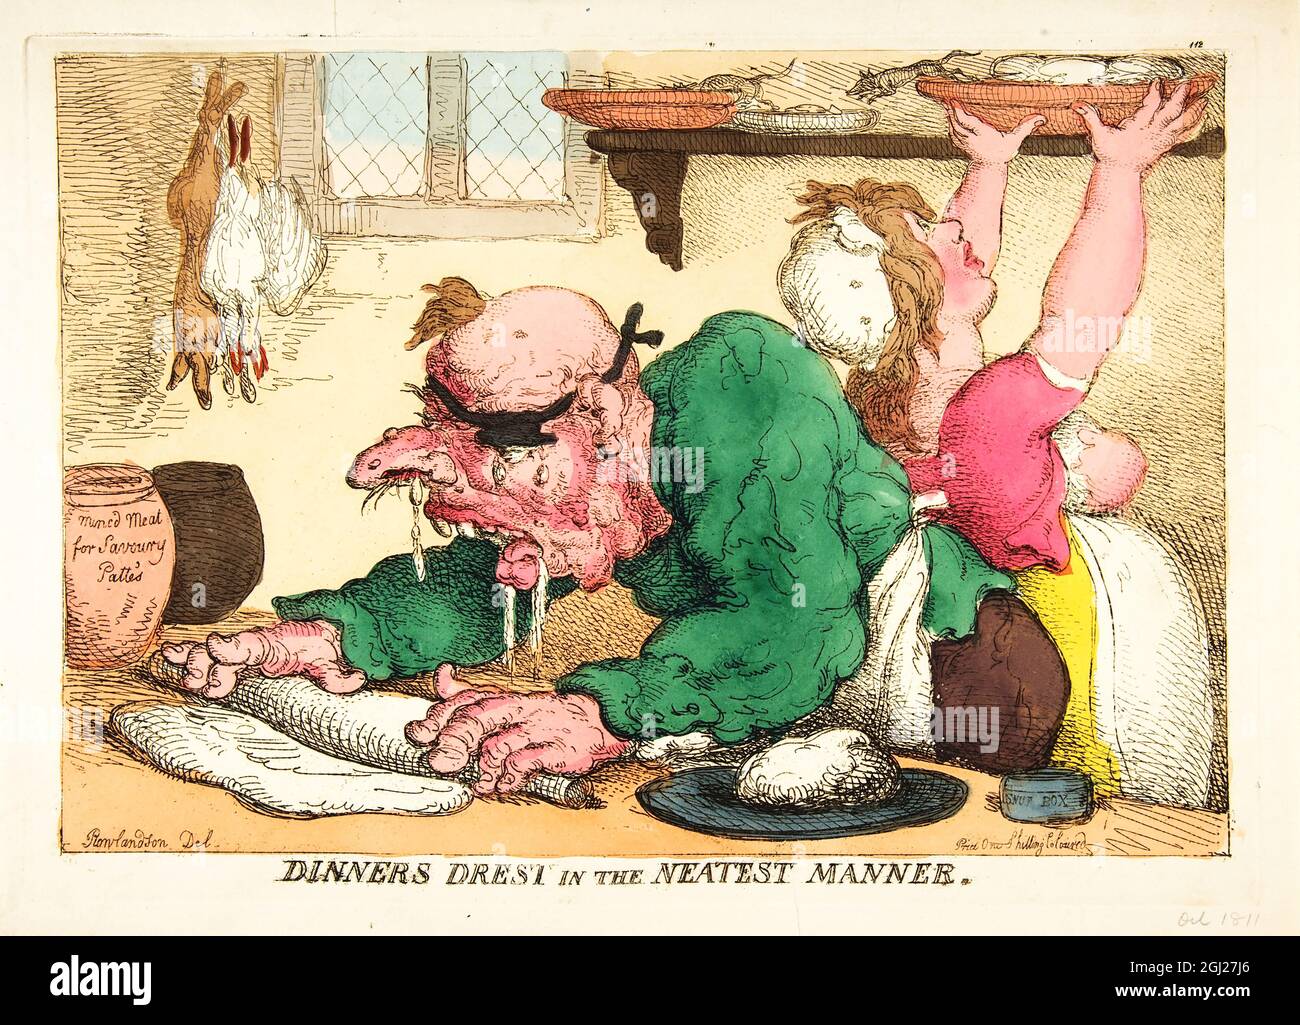 Dinners dressed in the neatest manner 1811 Artist: Thomas Rowlandson (1756-1827) an English artist and caricaturist of the Georgian Era. A social observer, he was a prolific artist and print maker.  Credit: Thomas Rowlandson/Alamy Stock Photo